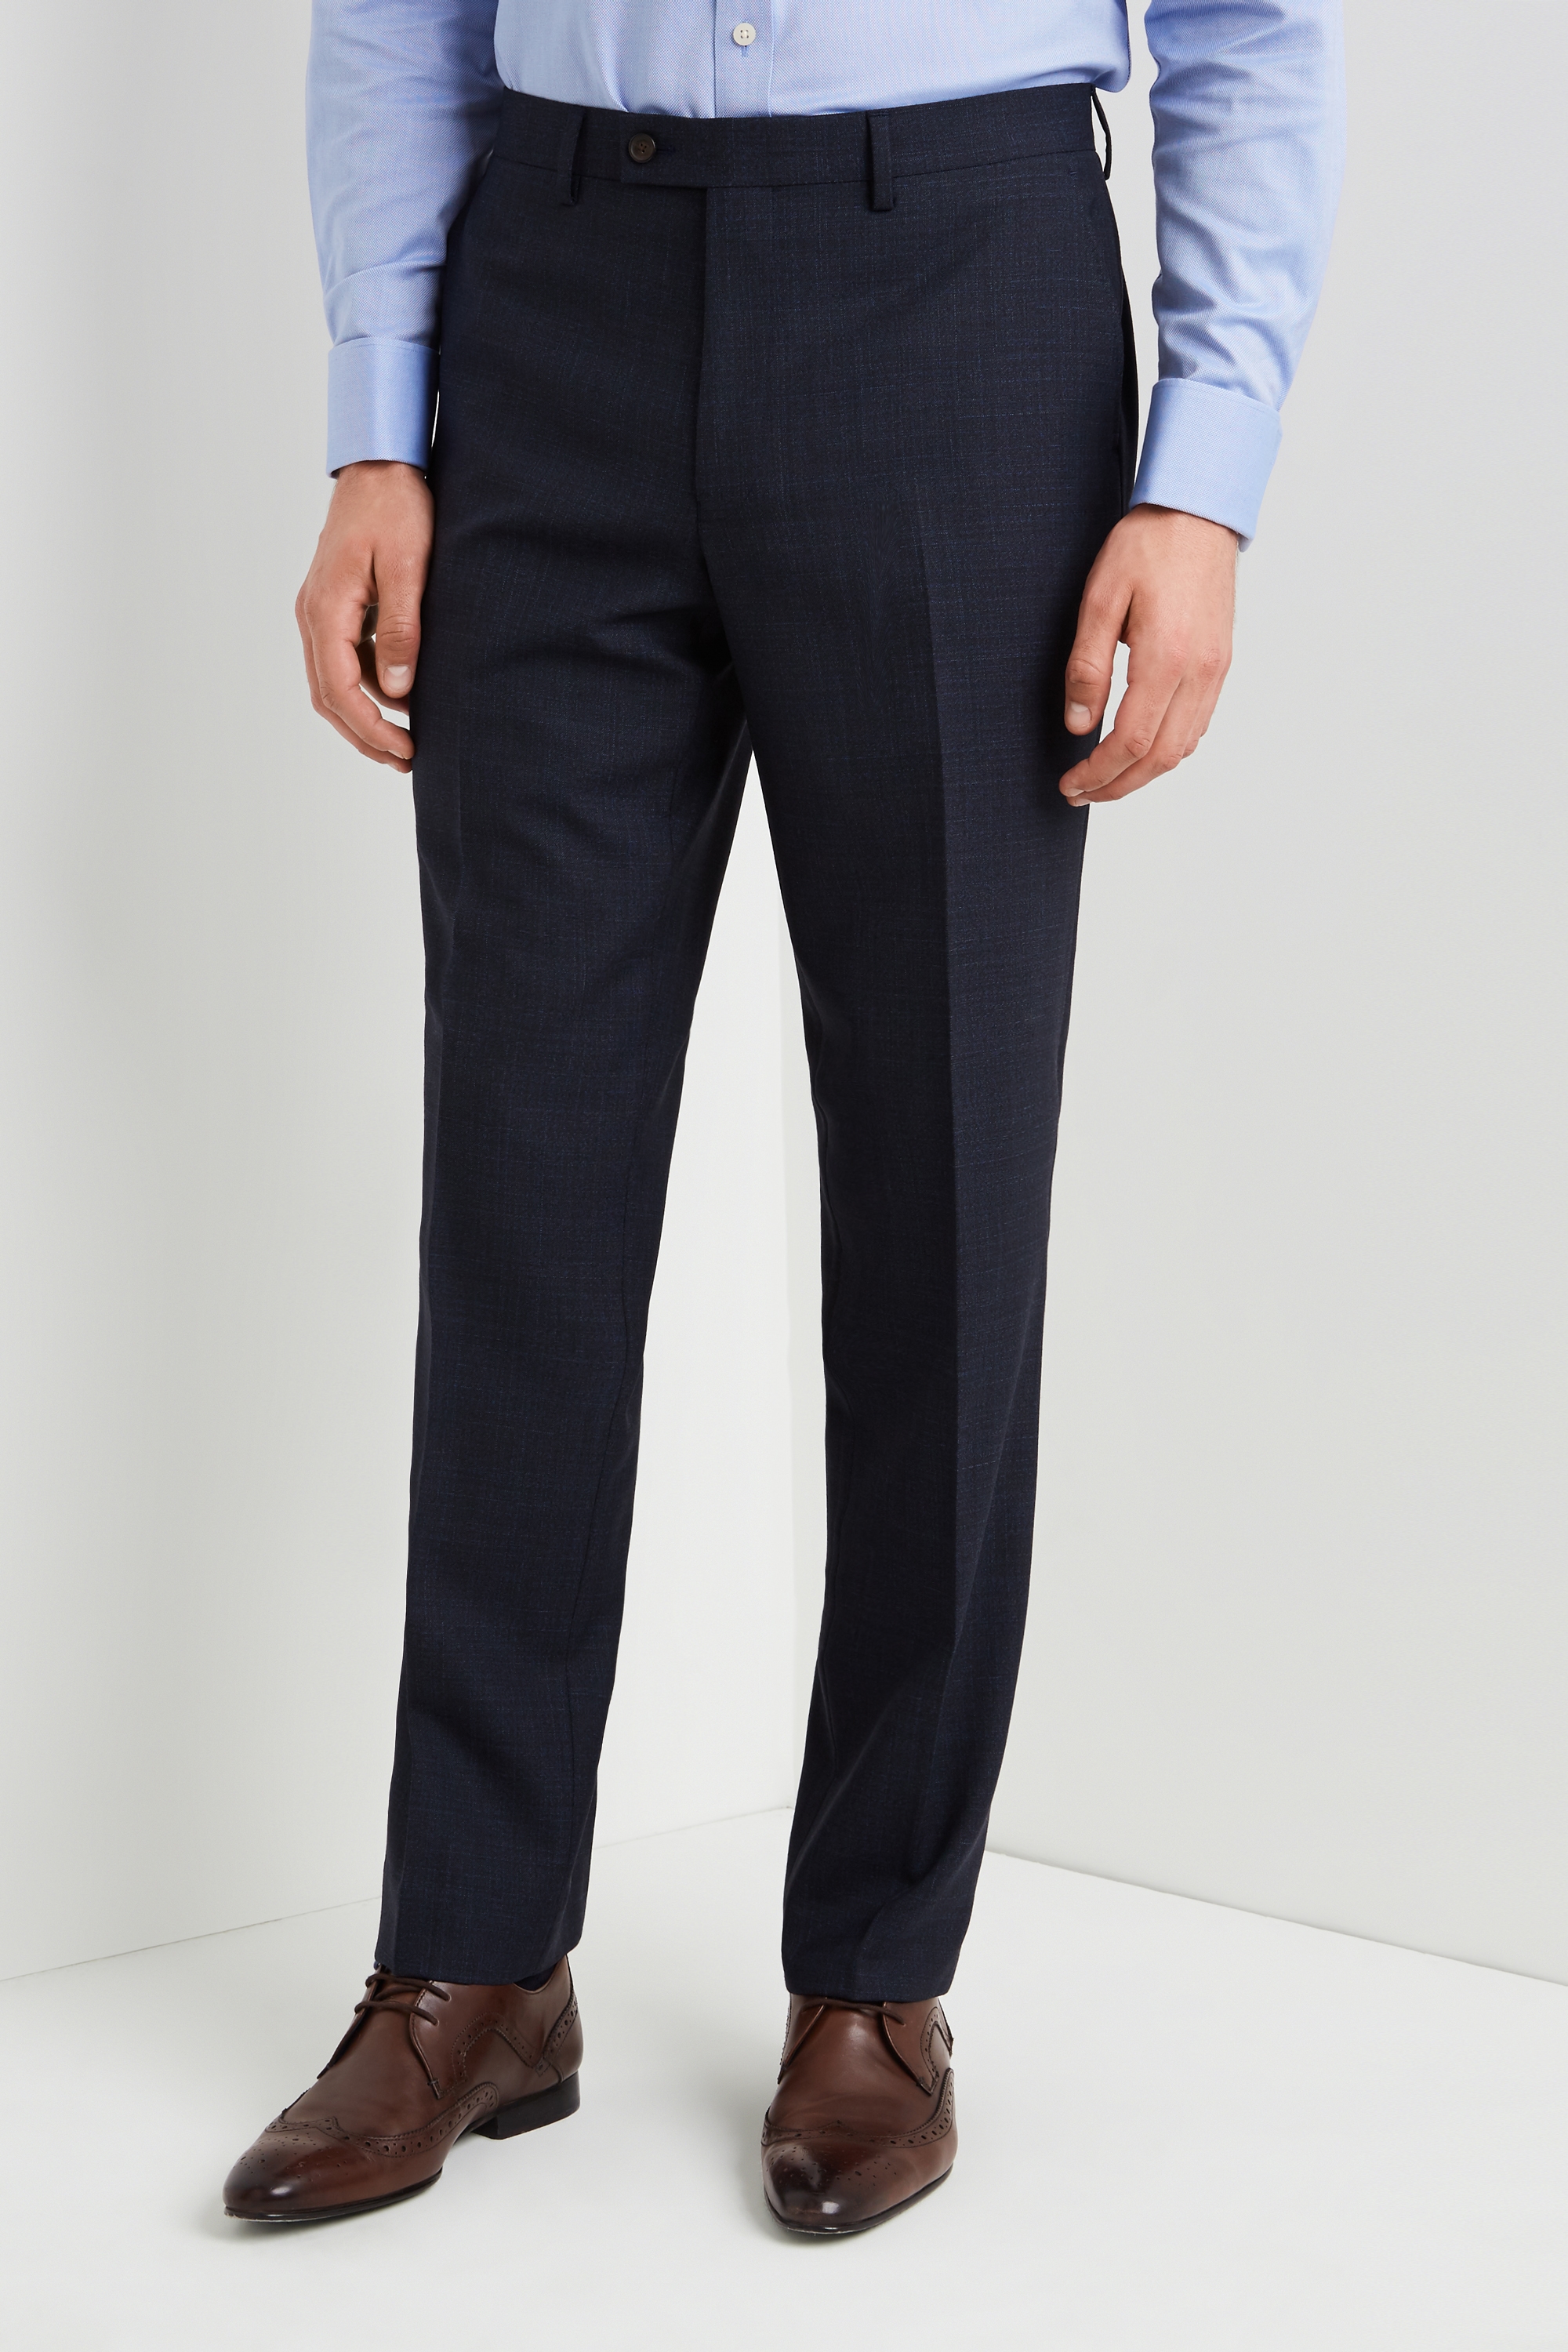 Ted Baker Gold Tailored Fit Airforce Blue Sharkskin Trousers | Buy ...